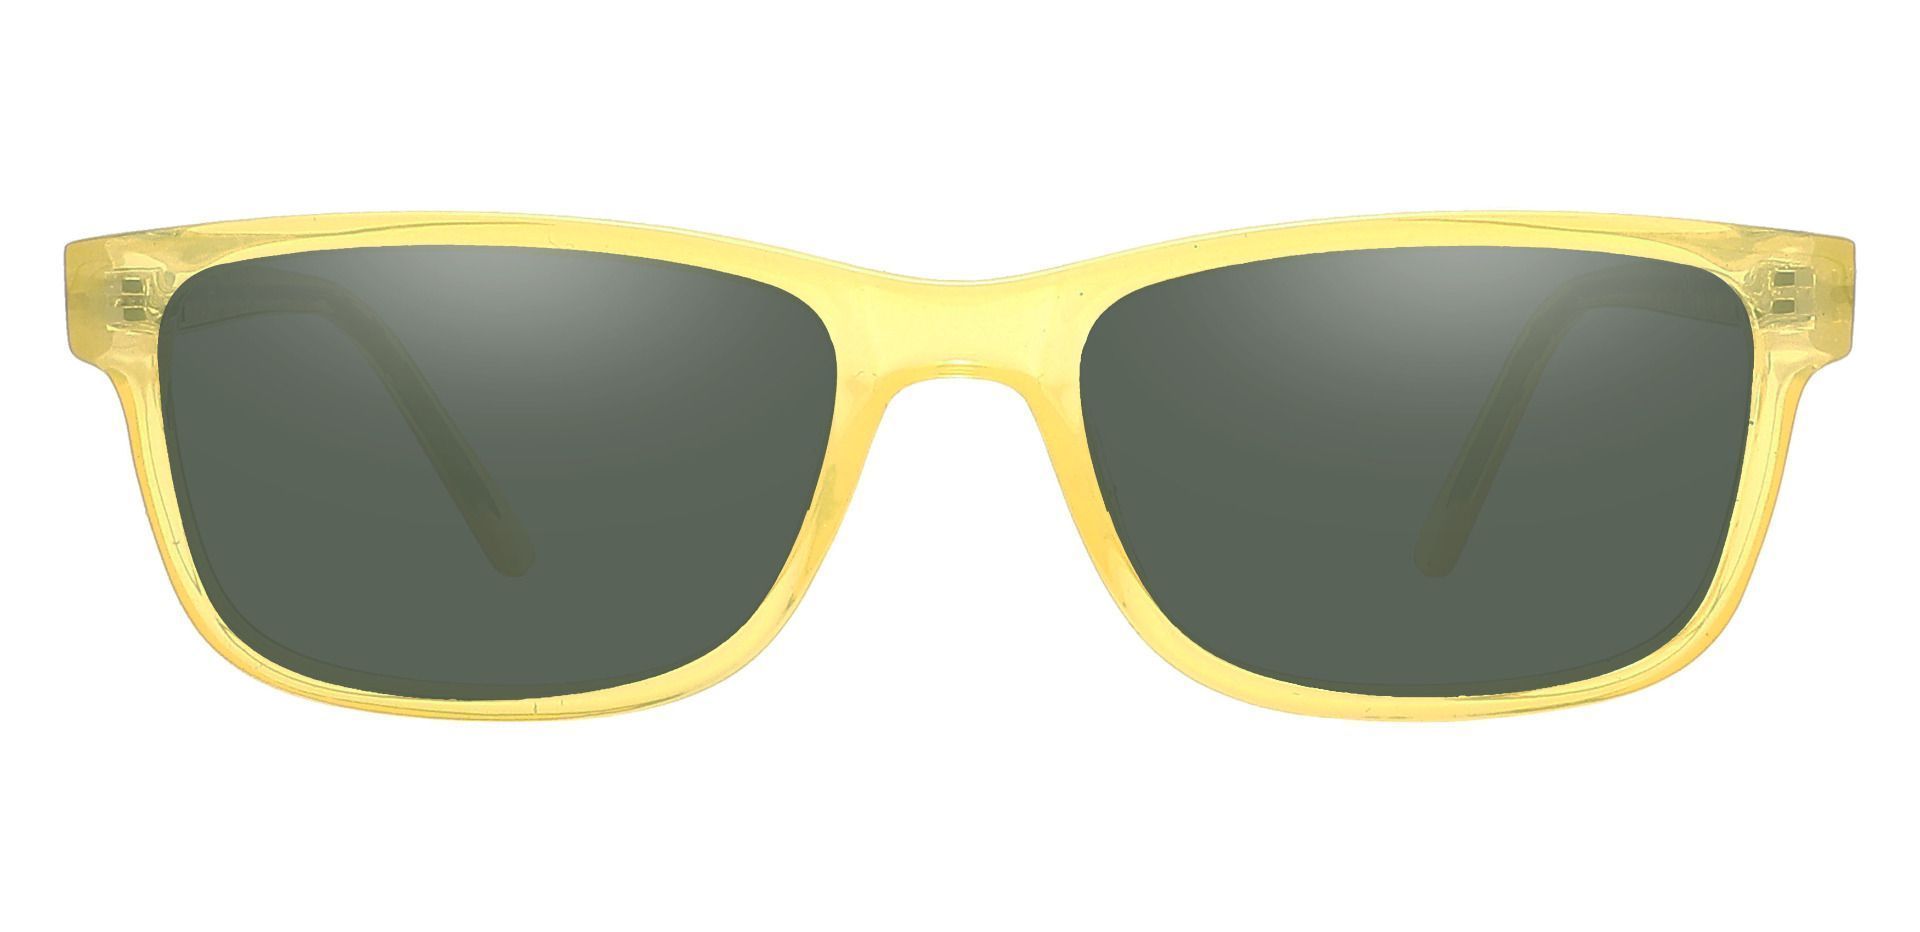 Cory Rectangle Prescription Sunglasses - Yellow Frame With Green Lenses